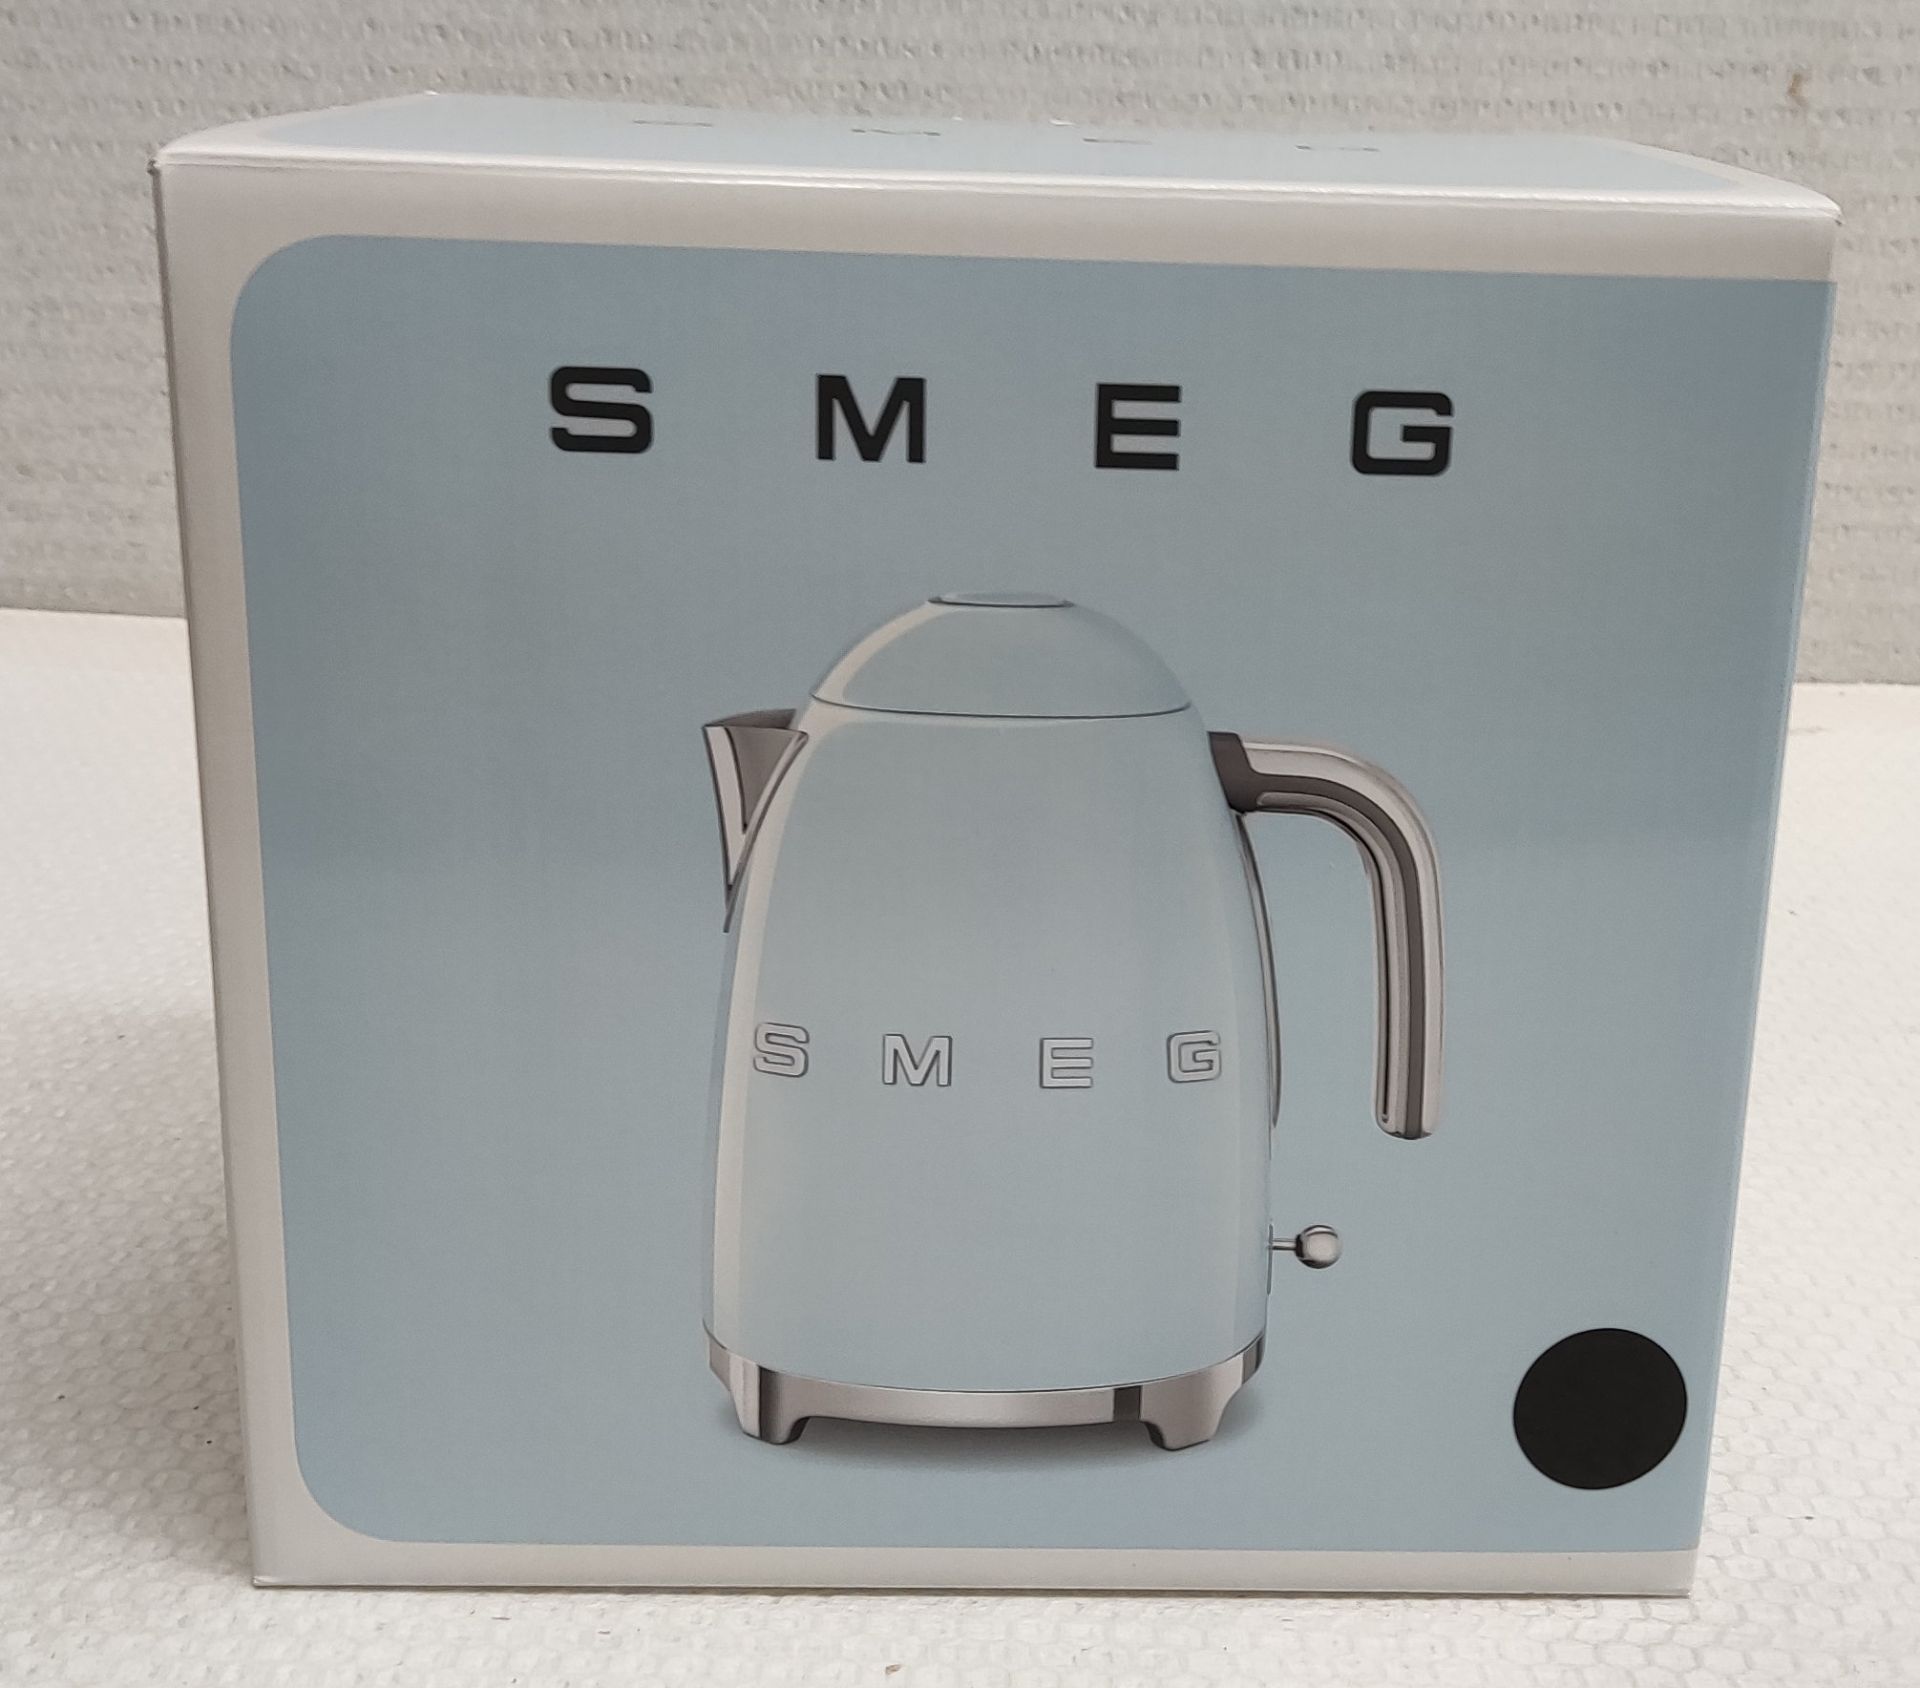 1 x SMEG 50'S Style Kettle In Black - Boxed - Original RRP £149.00 - Image 2 of 7